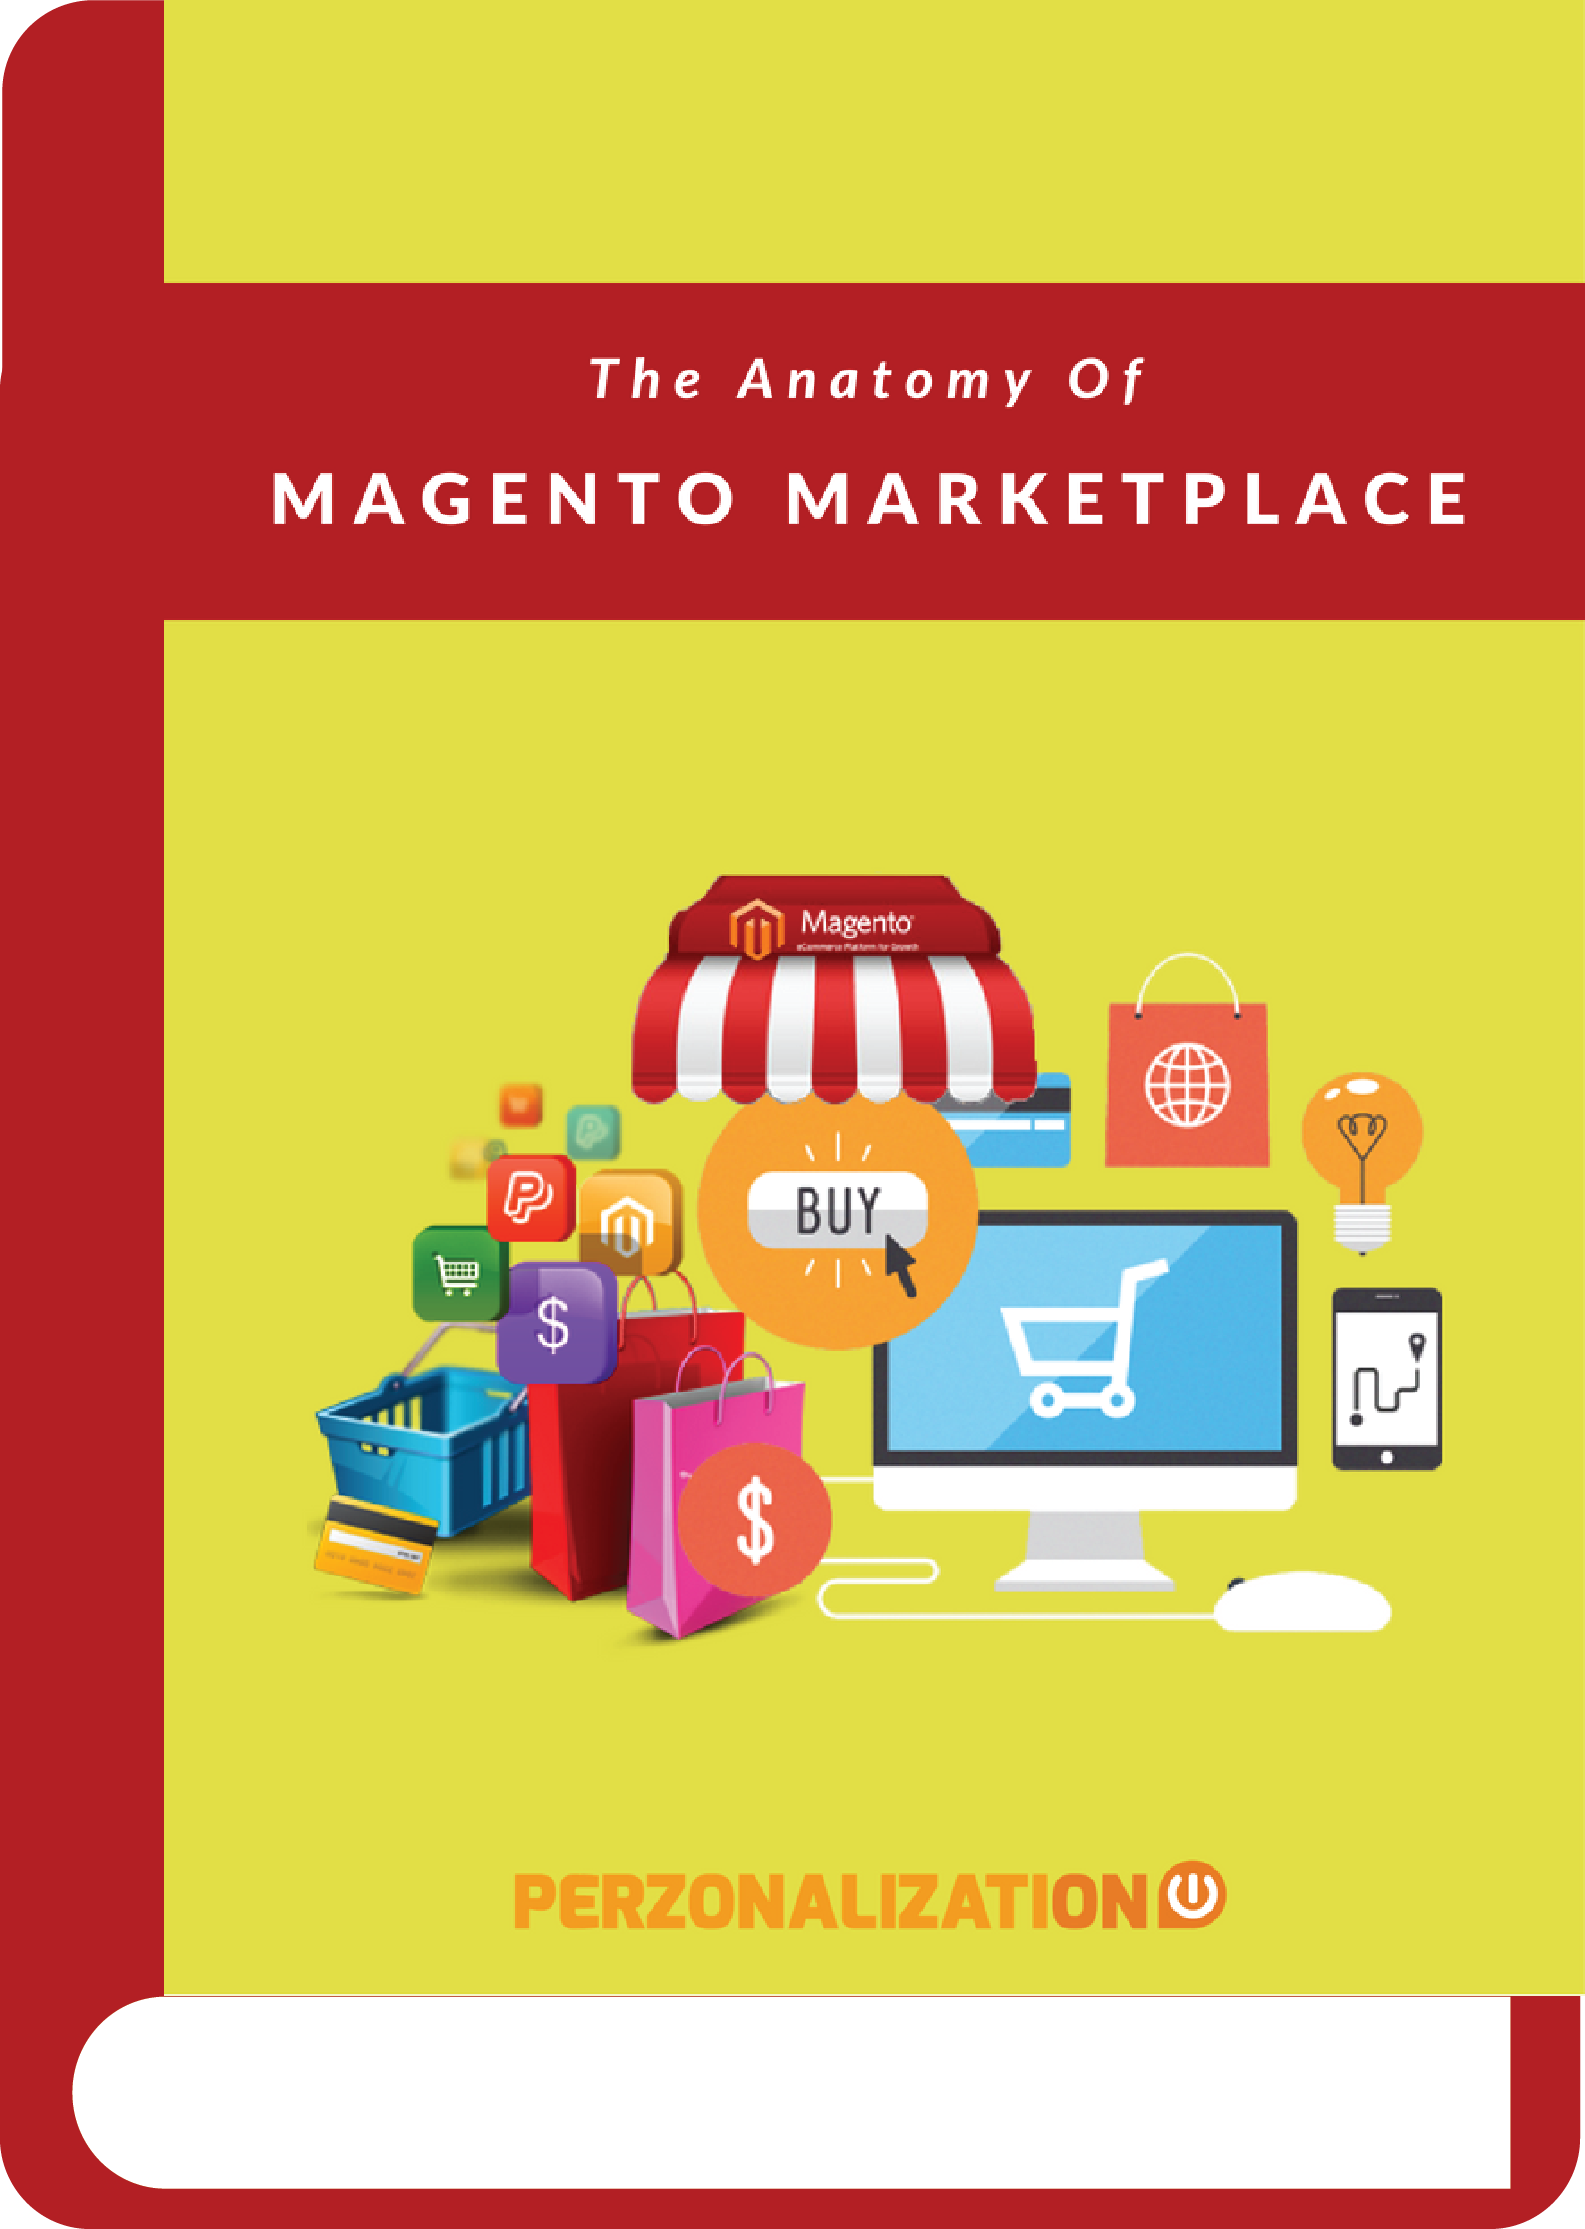 Magento has been able to offer the desired flexibility to its users through the varied extensions it offers through the Magento Marketplace.